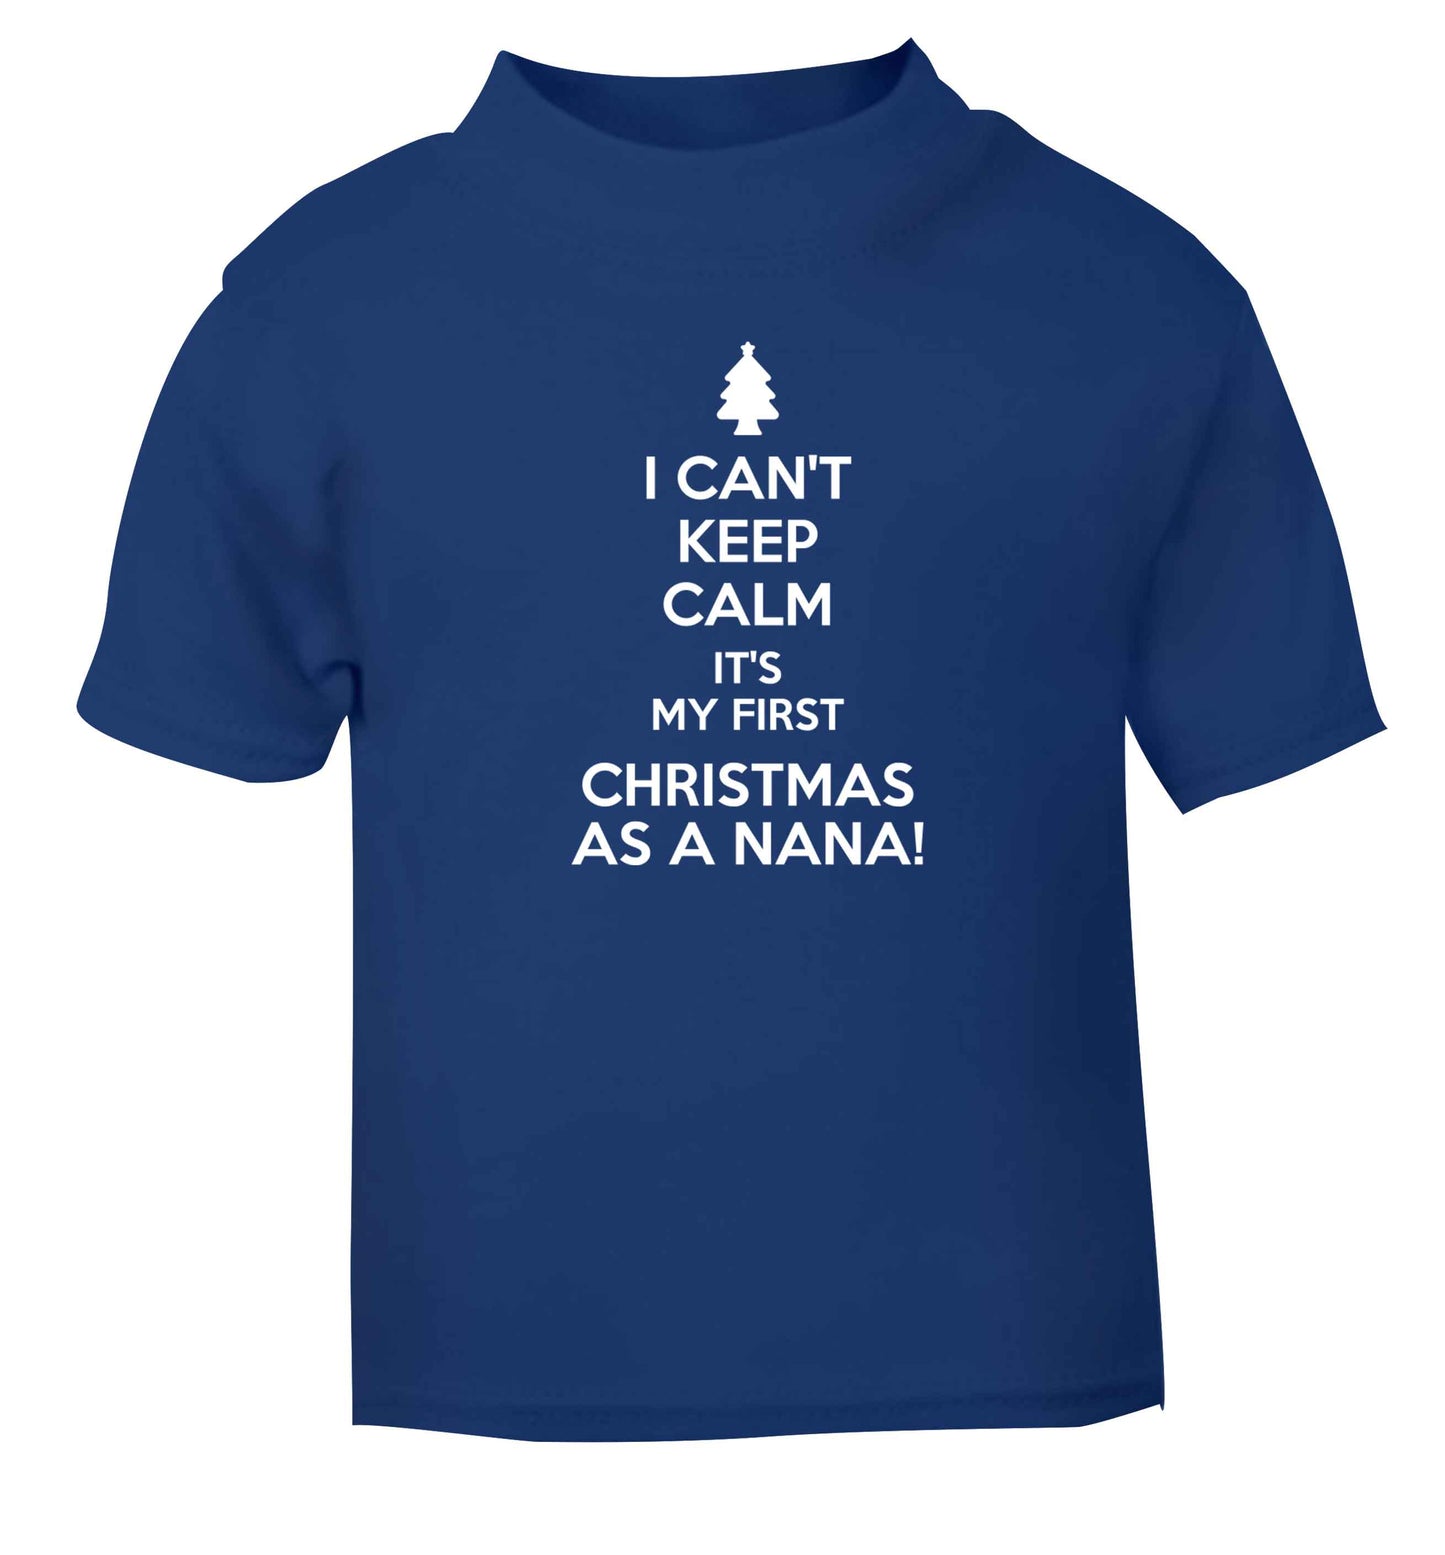 I can't keep calm it's my first Christmas as a nana! blue Baby Toddler Tshirt 2 Years